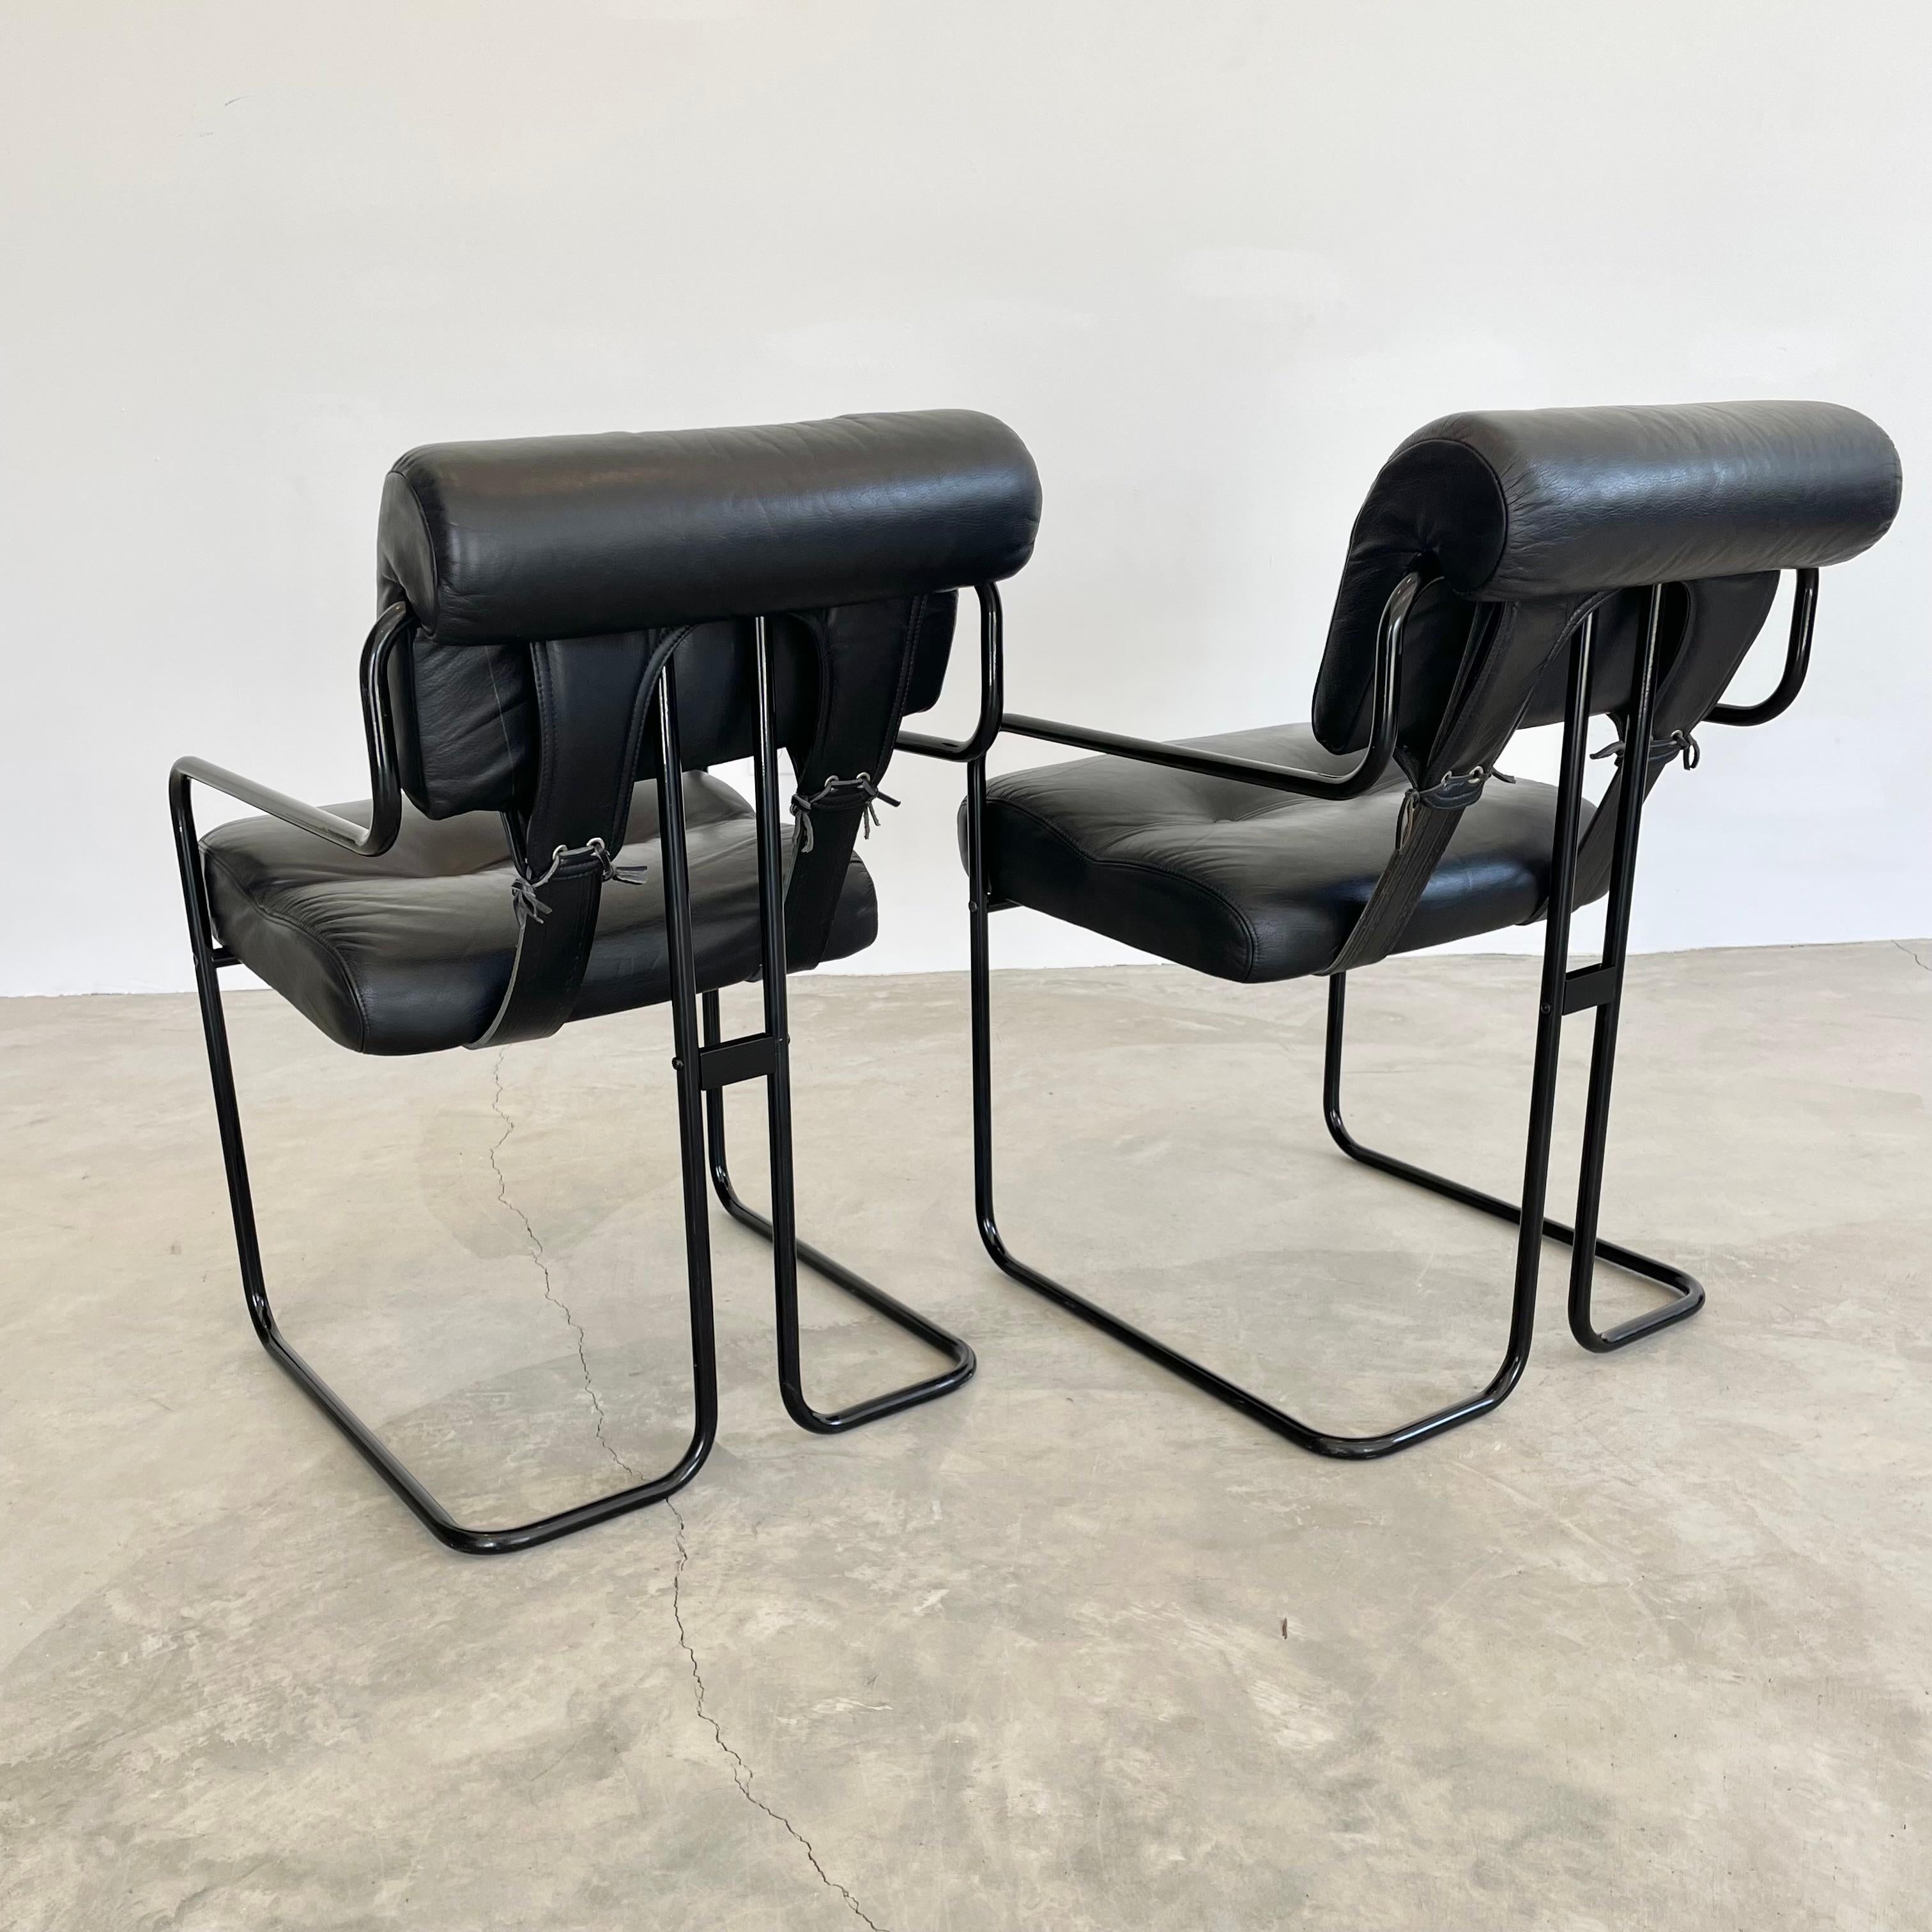 Guido Faleschini Tucroma Dining Chairs in Black Leather for Mariani, 1980s Italy For Sale 7